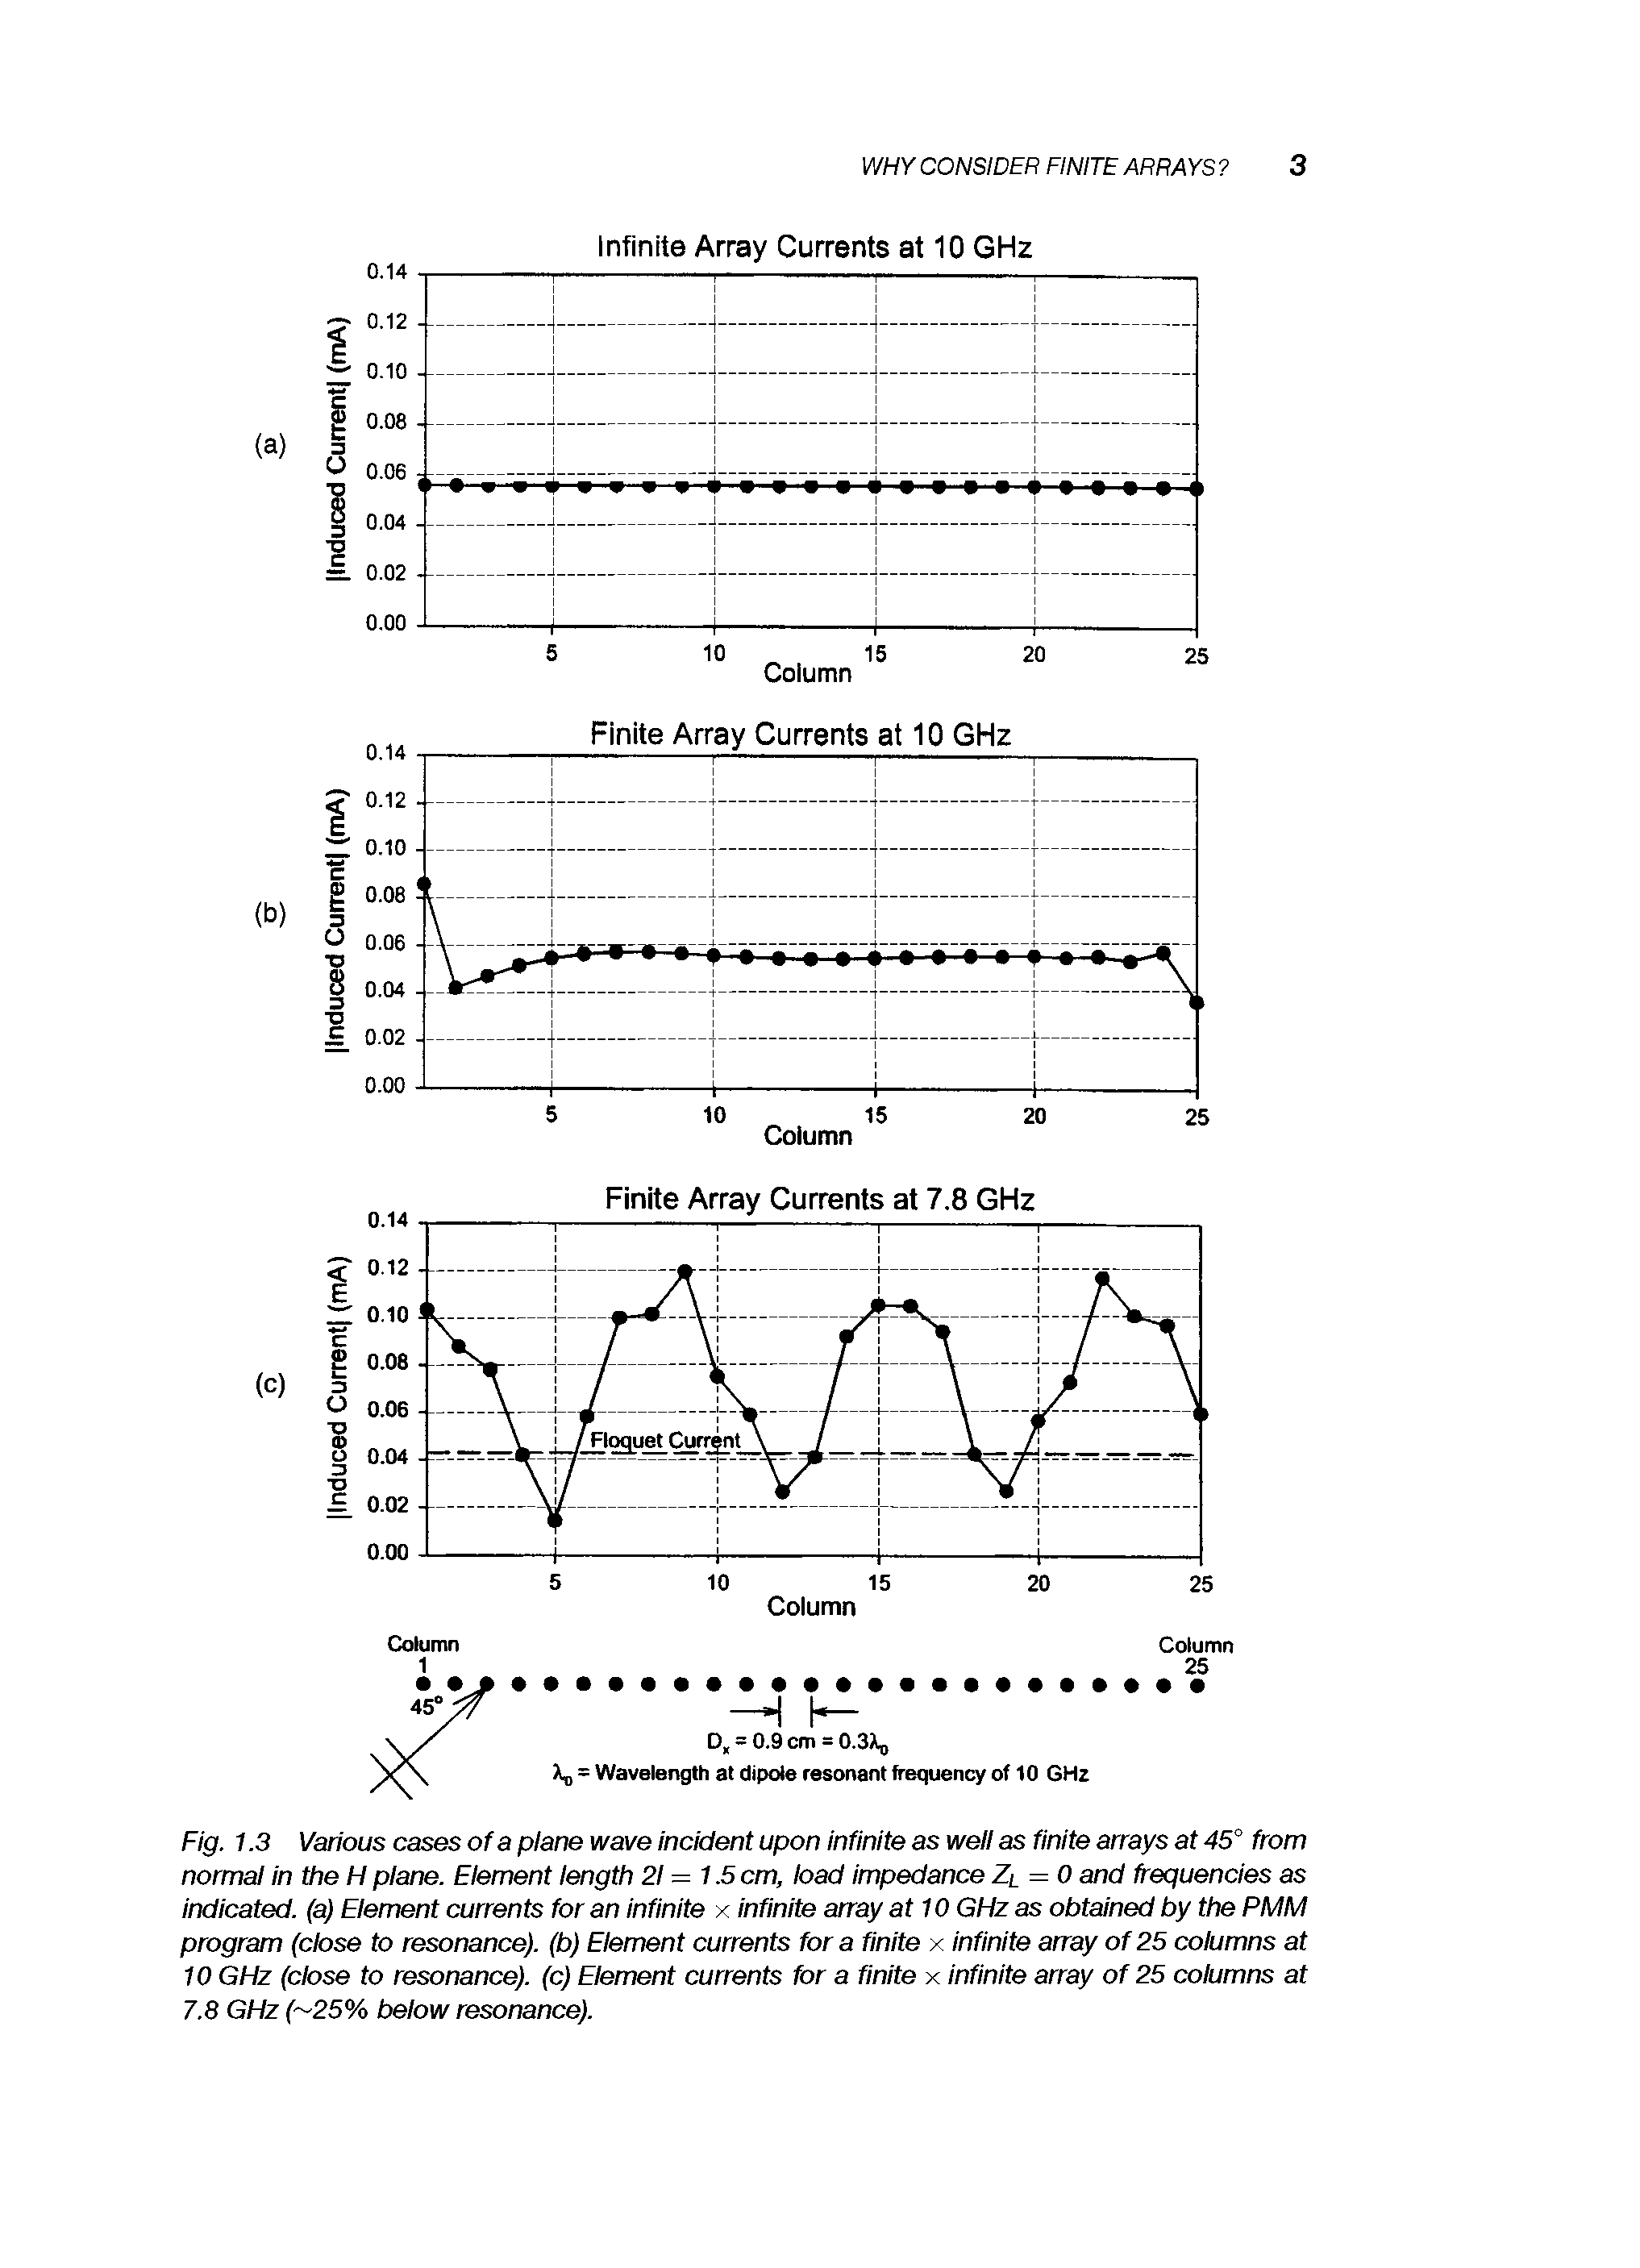 Fig. 1.3 Various cases of a plane wave incident upon infinite as well as finite arrays at 45° from normal in the H plane. Element length 21=1.5 cm, load impedance Zl = 0 and frequencies as indicated, (a) Element currents for an infinite x infinite array at 10 GHz as obtained by the PMM program (close to resonance), (b) Element currents for a finite x infinite array of 25 columns at 10 GHz (close to resonance), (c) Element currents for a finite x infinite array of 25 columns at 7.8 GHz ( 25% below resonance).